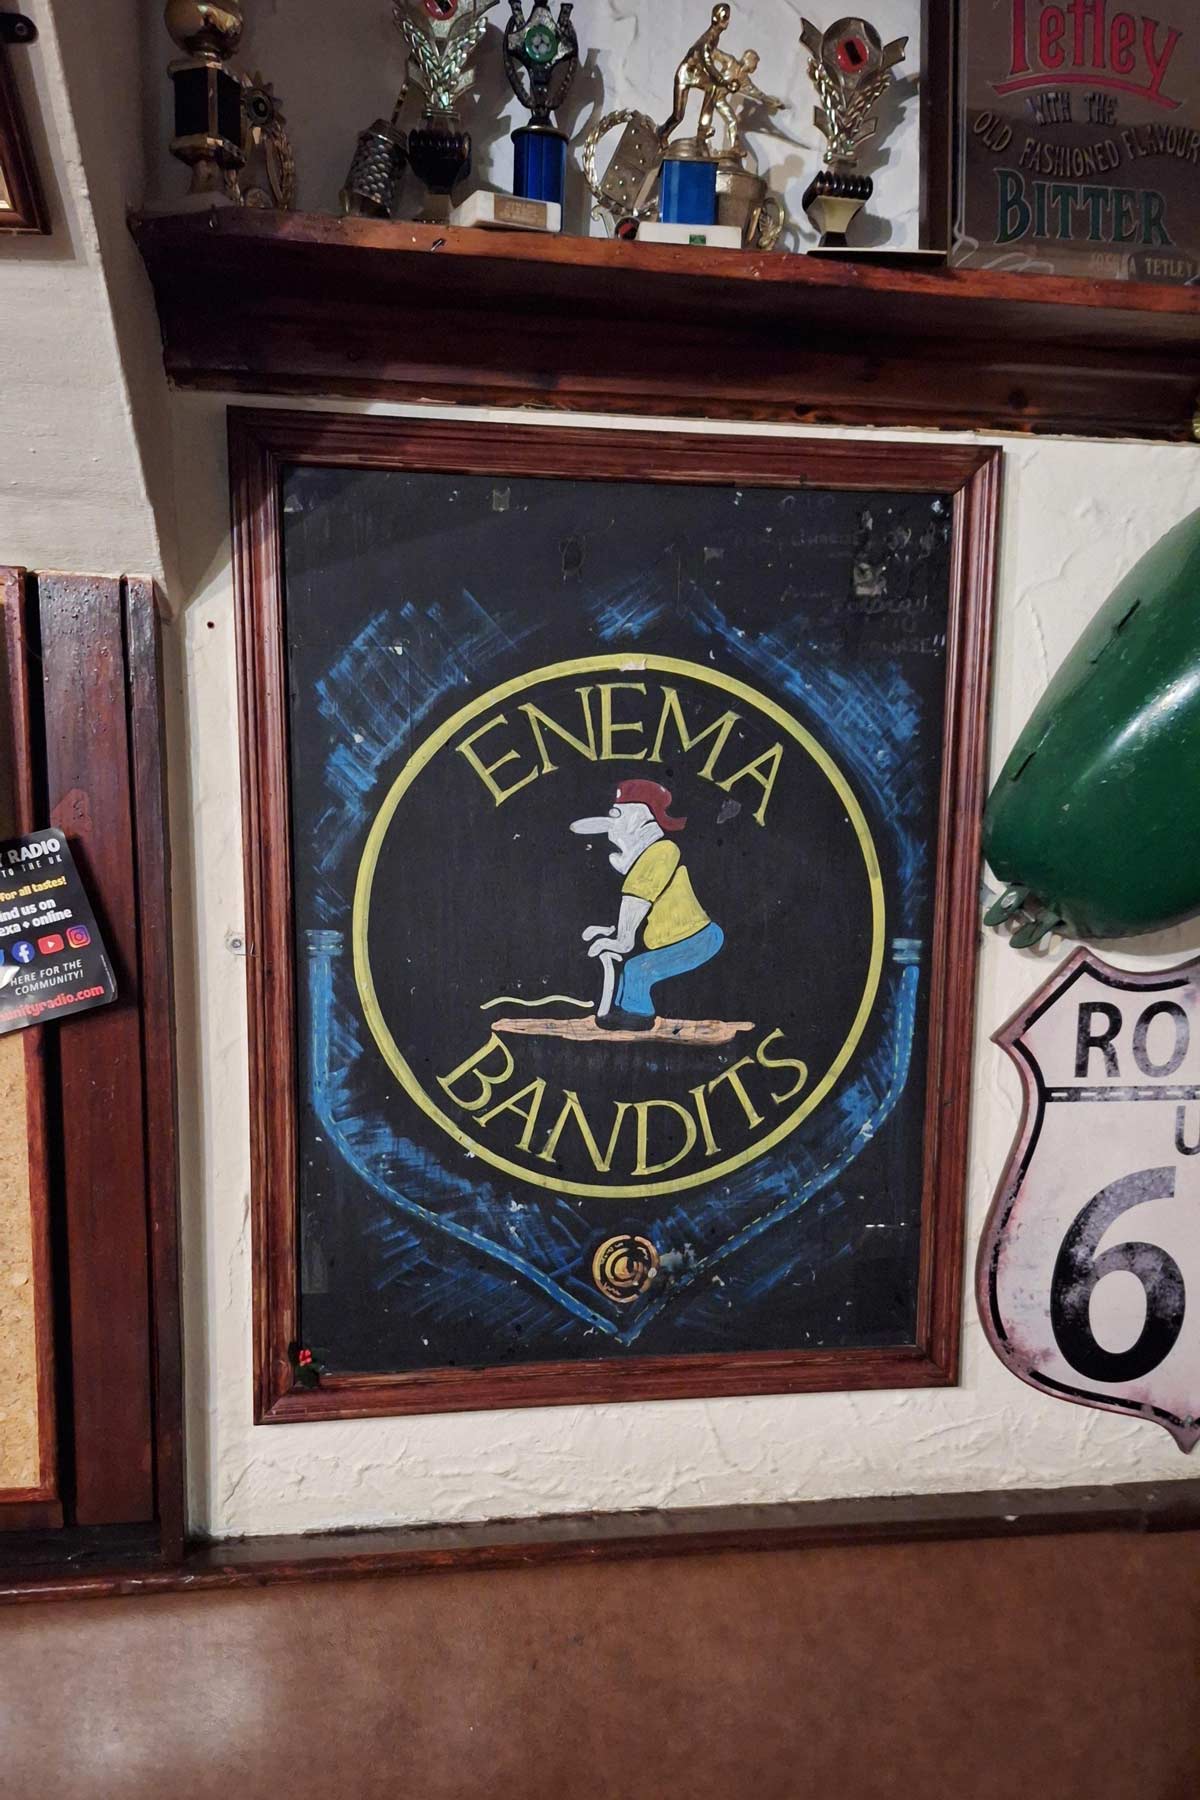 There's a bike club in my home town. Here's their logo in their 'chosen' pub